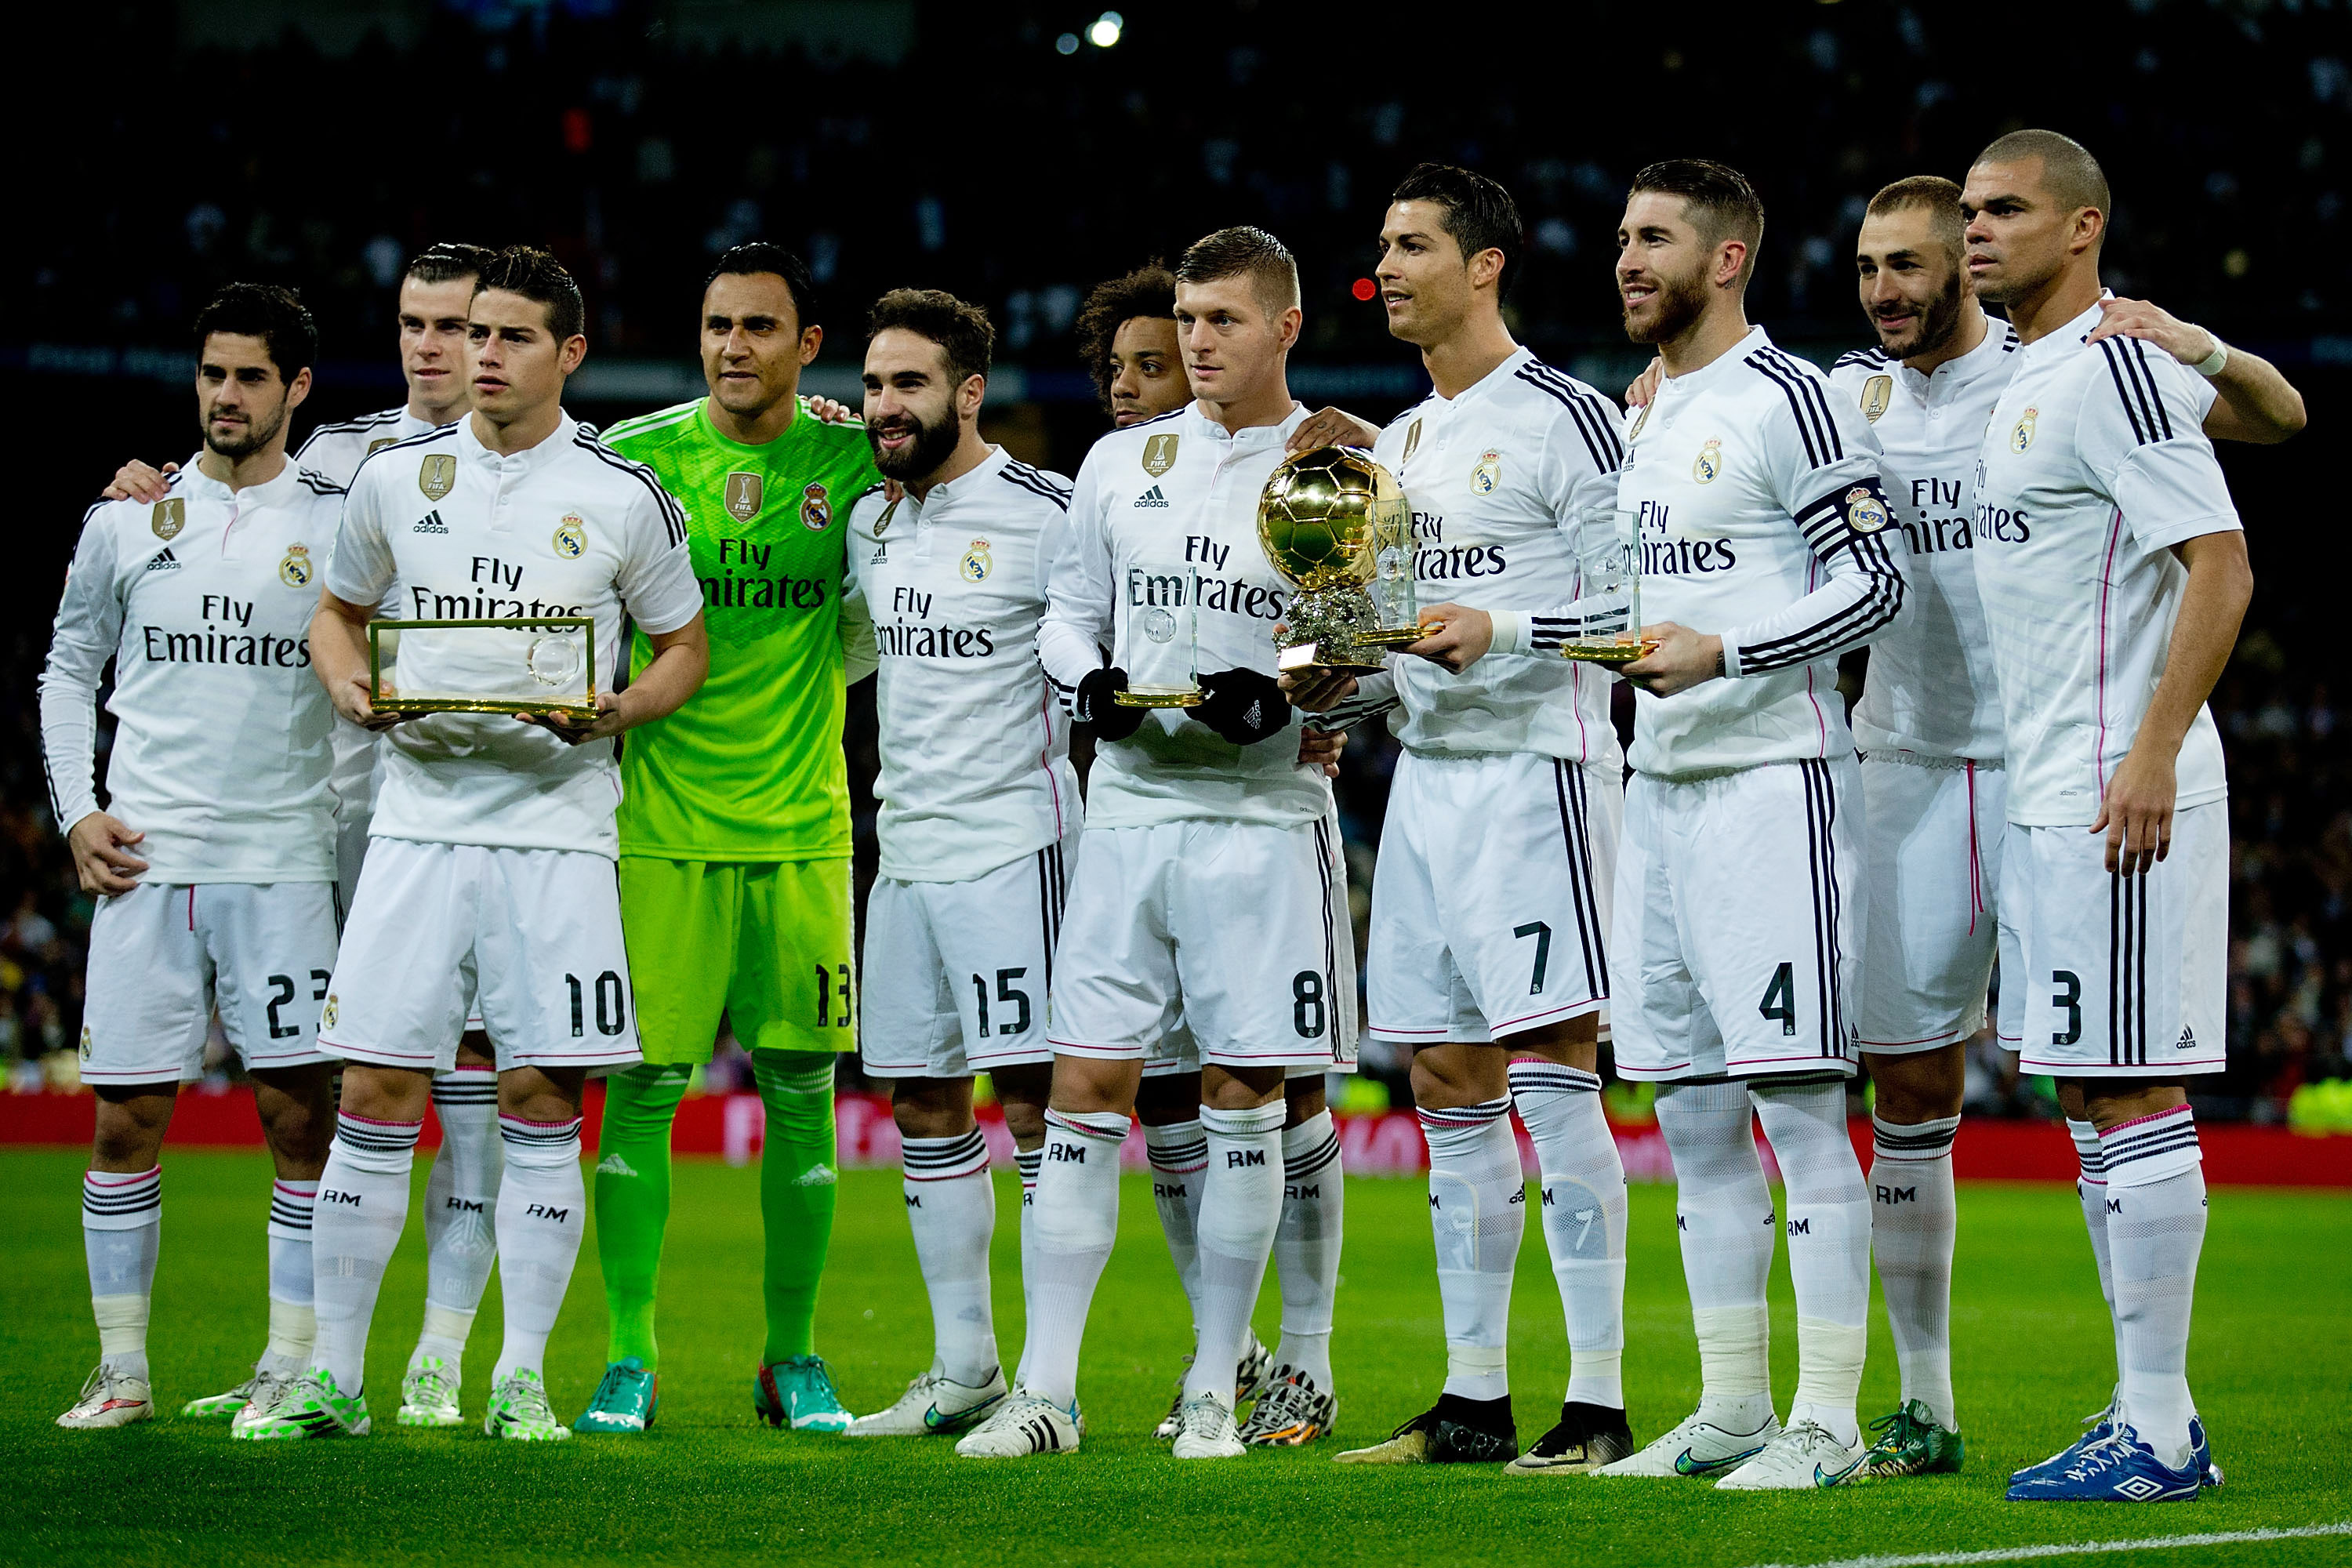 Getafe vs. Real Madrid: Date, Time, Live Stream, TV Info and